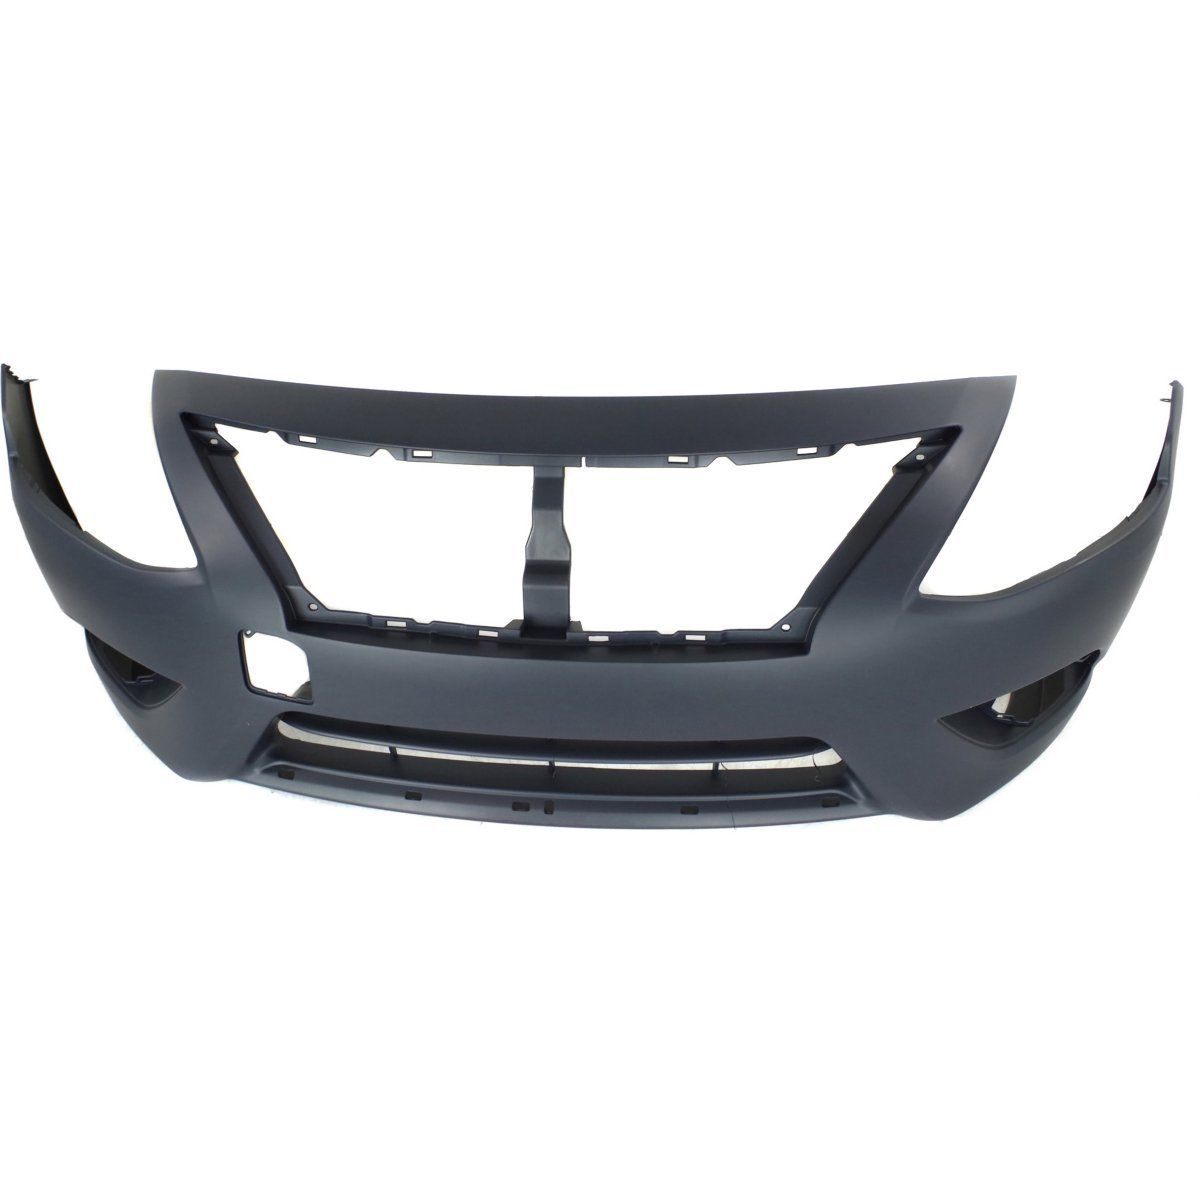 2015-2016 NISSAN VERSA Front Bumper Cover Sedan  w/Chrome Insert Painted to Match